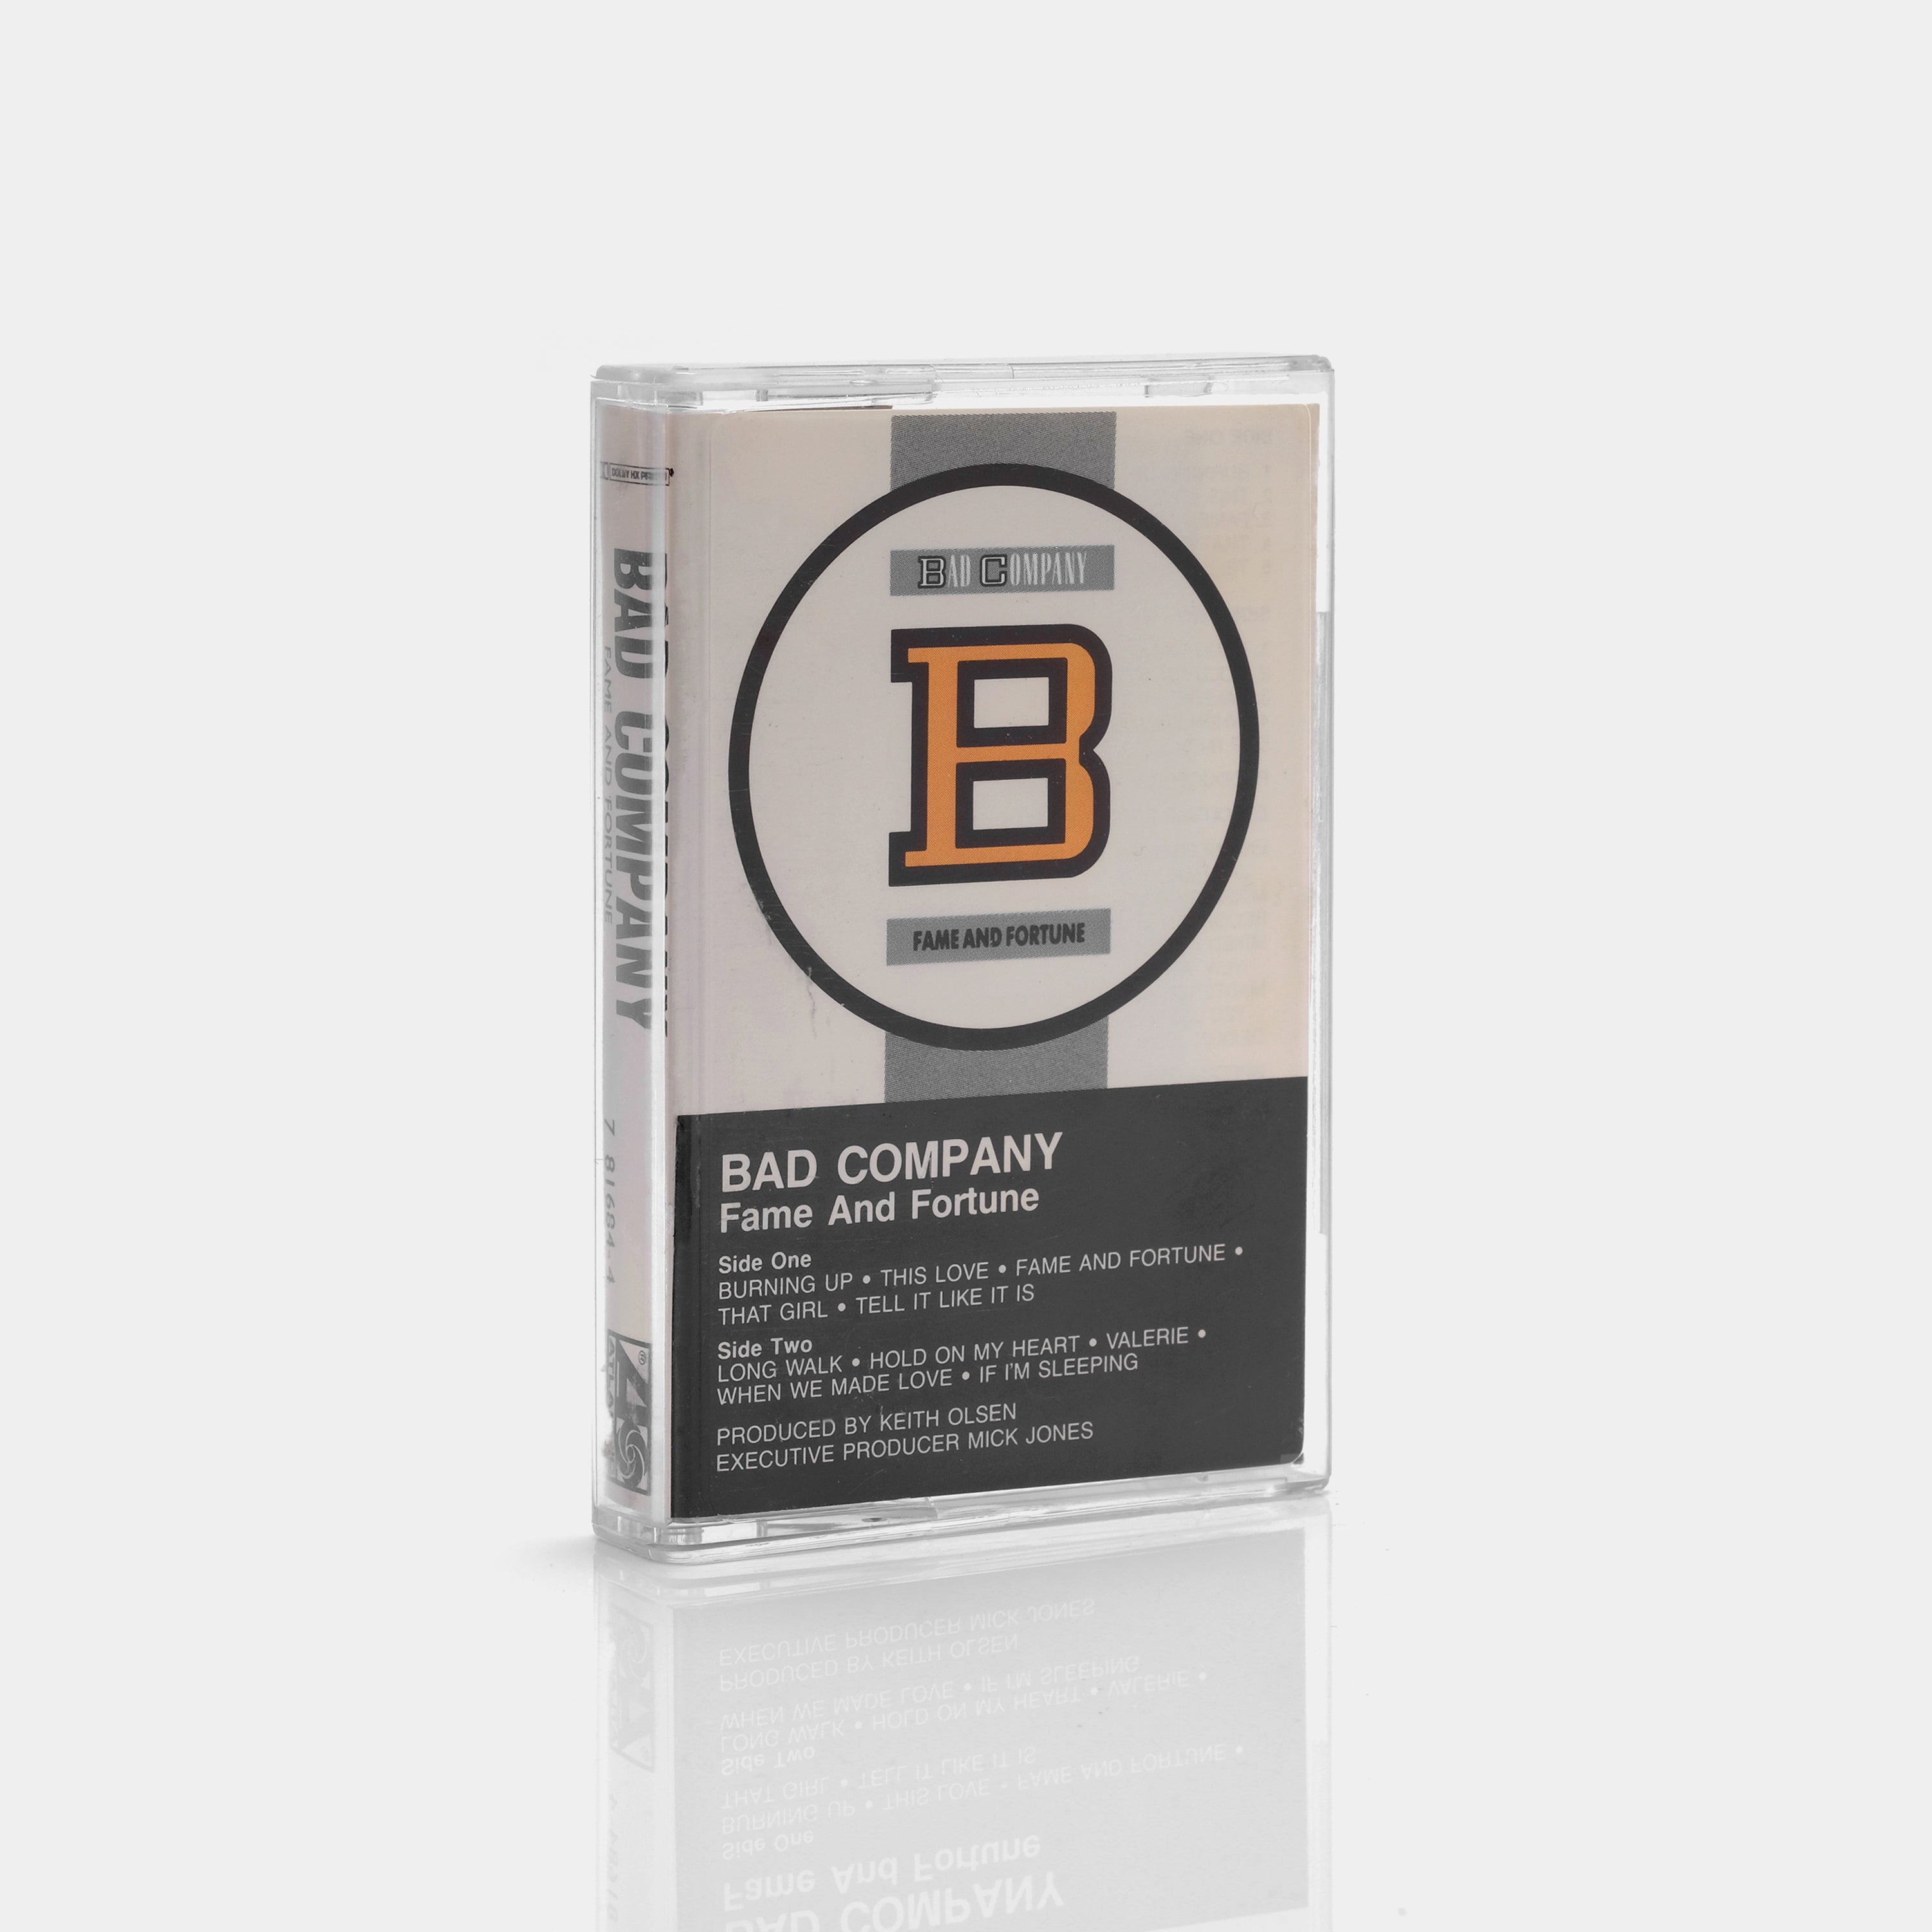 Bad Company - Fame And Fortune Cassette Tape